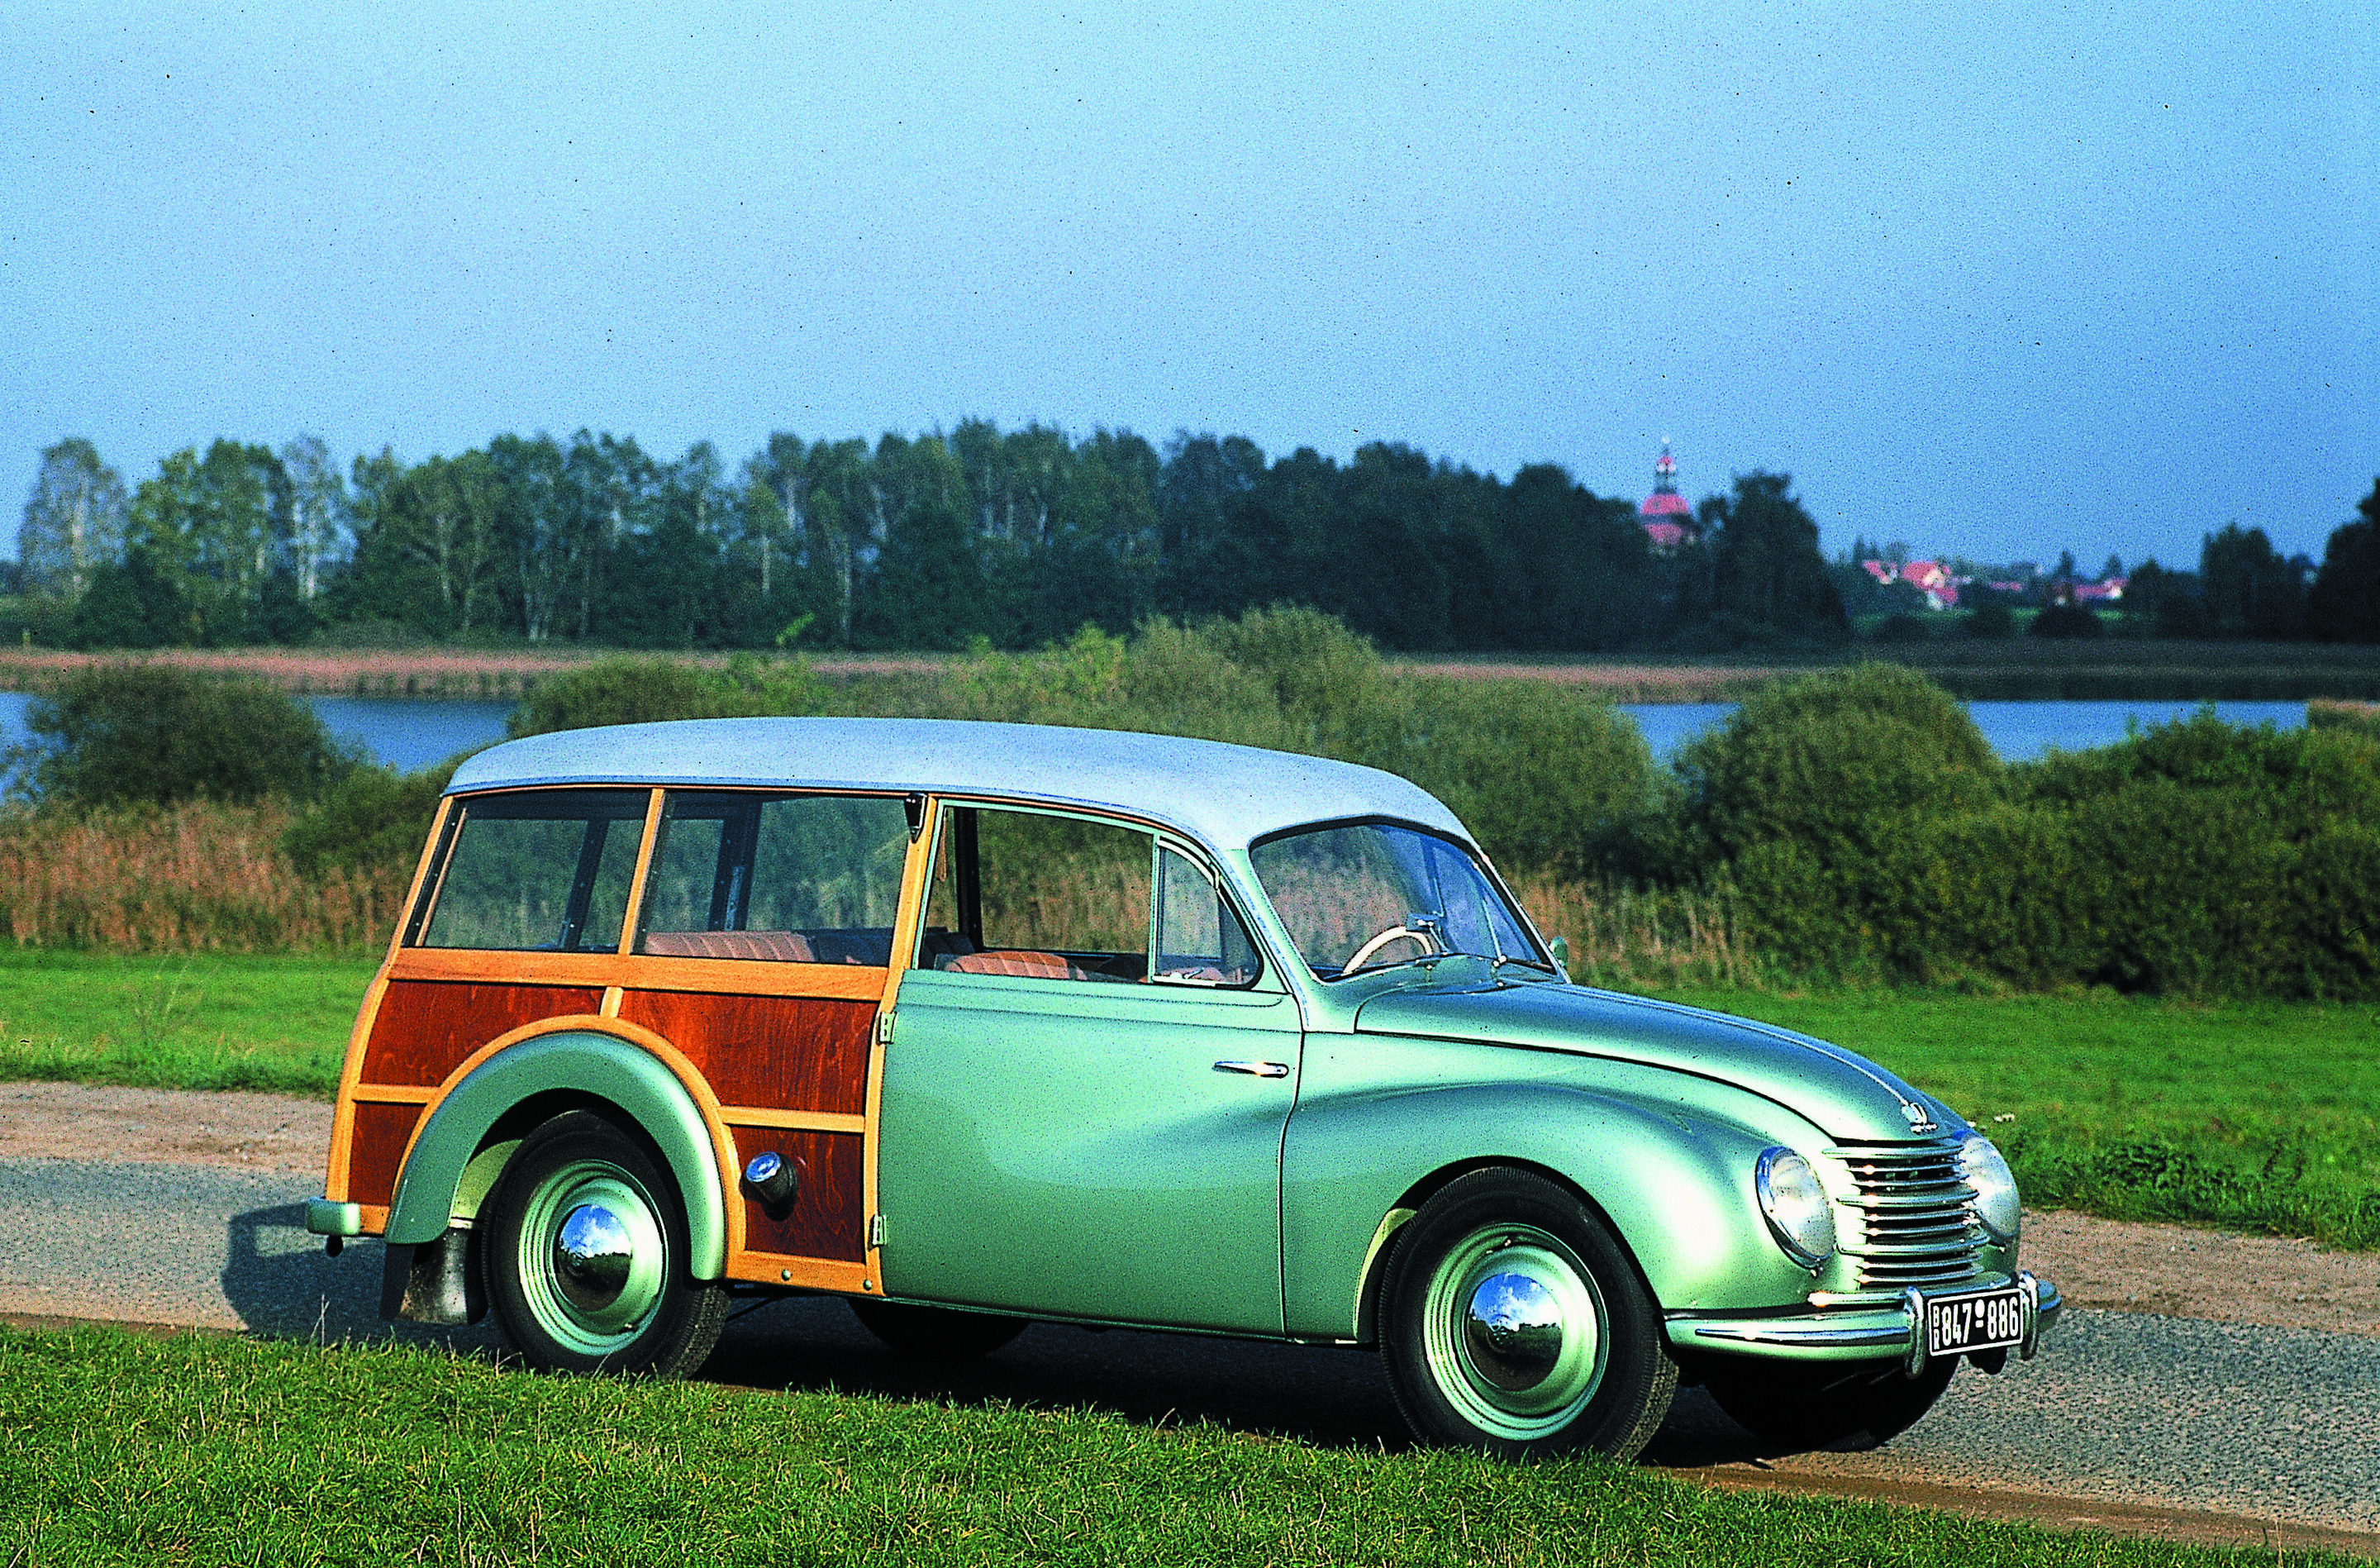 Newly restored: DKW Meisterklasse Universal type F 89 S, from 1951 (sideview)